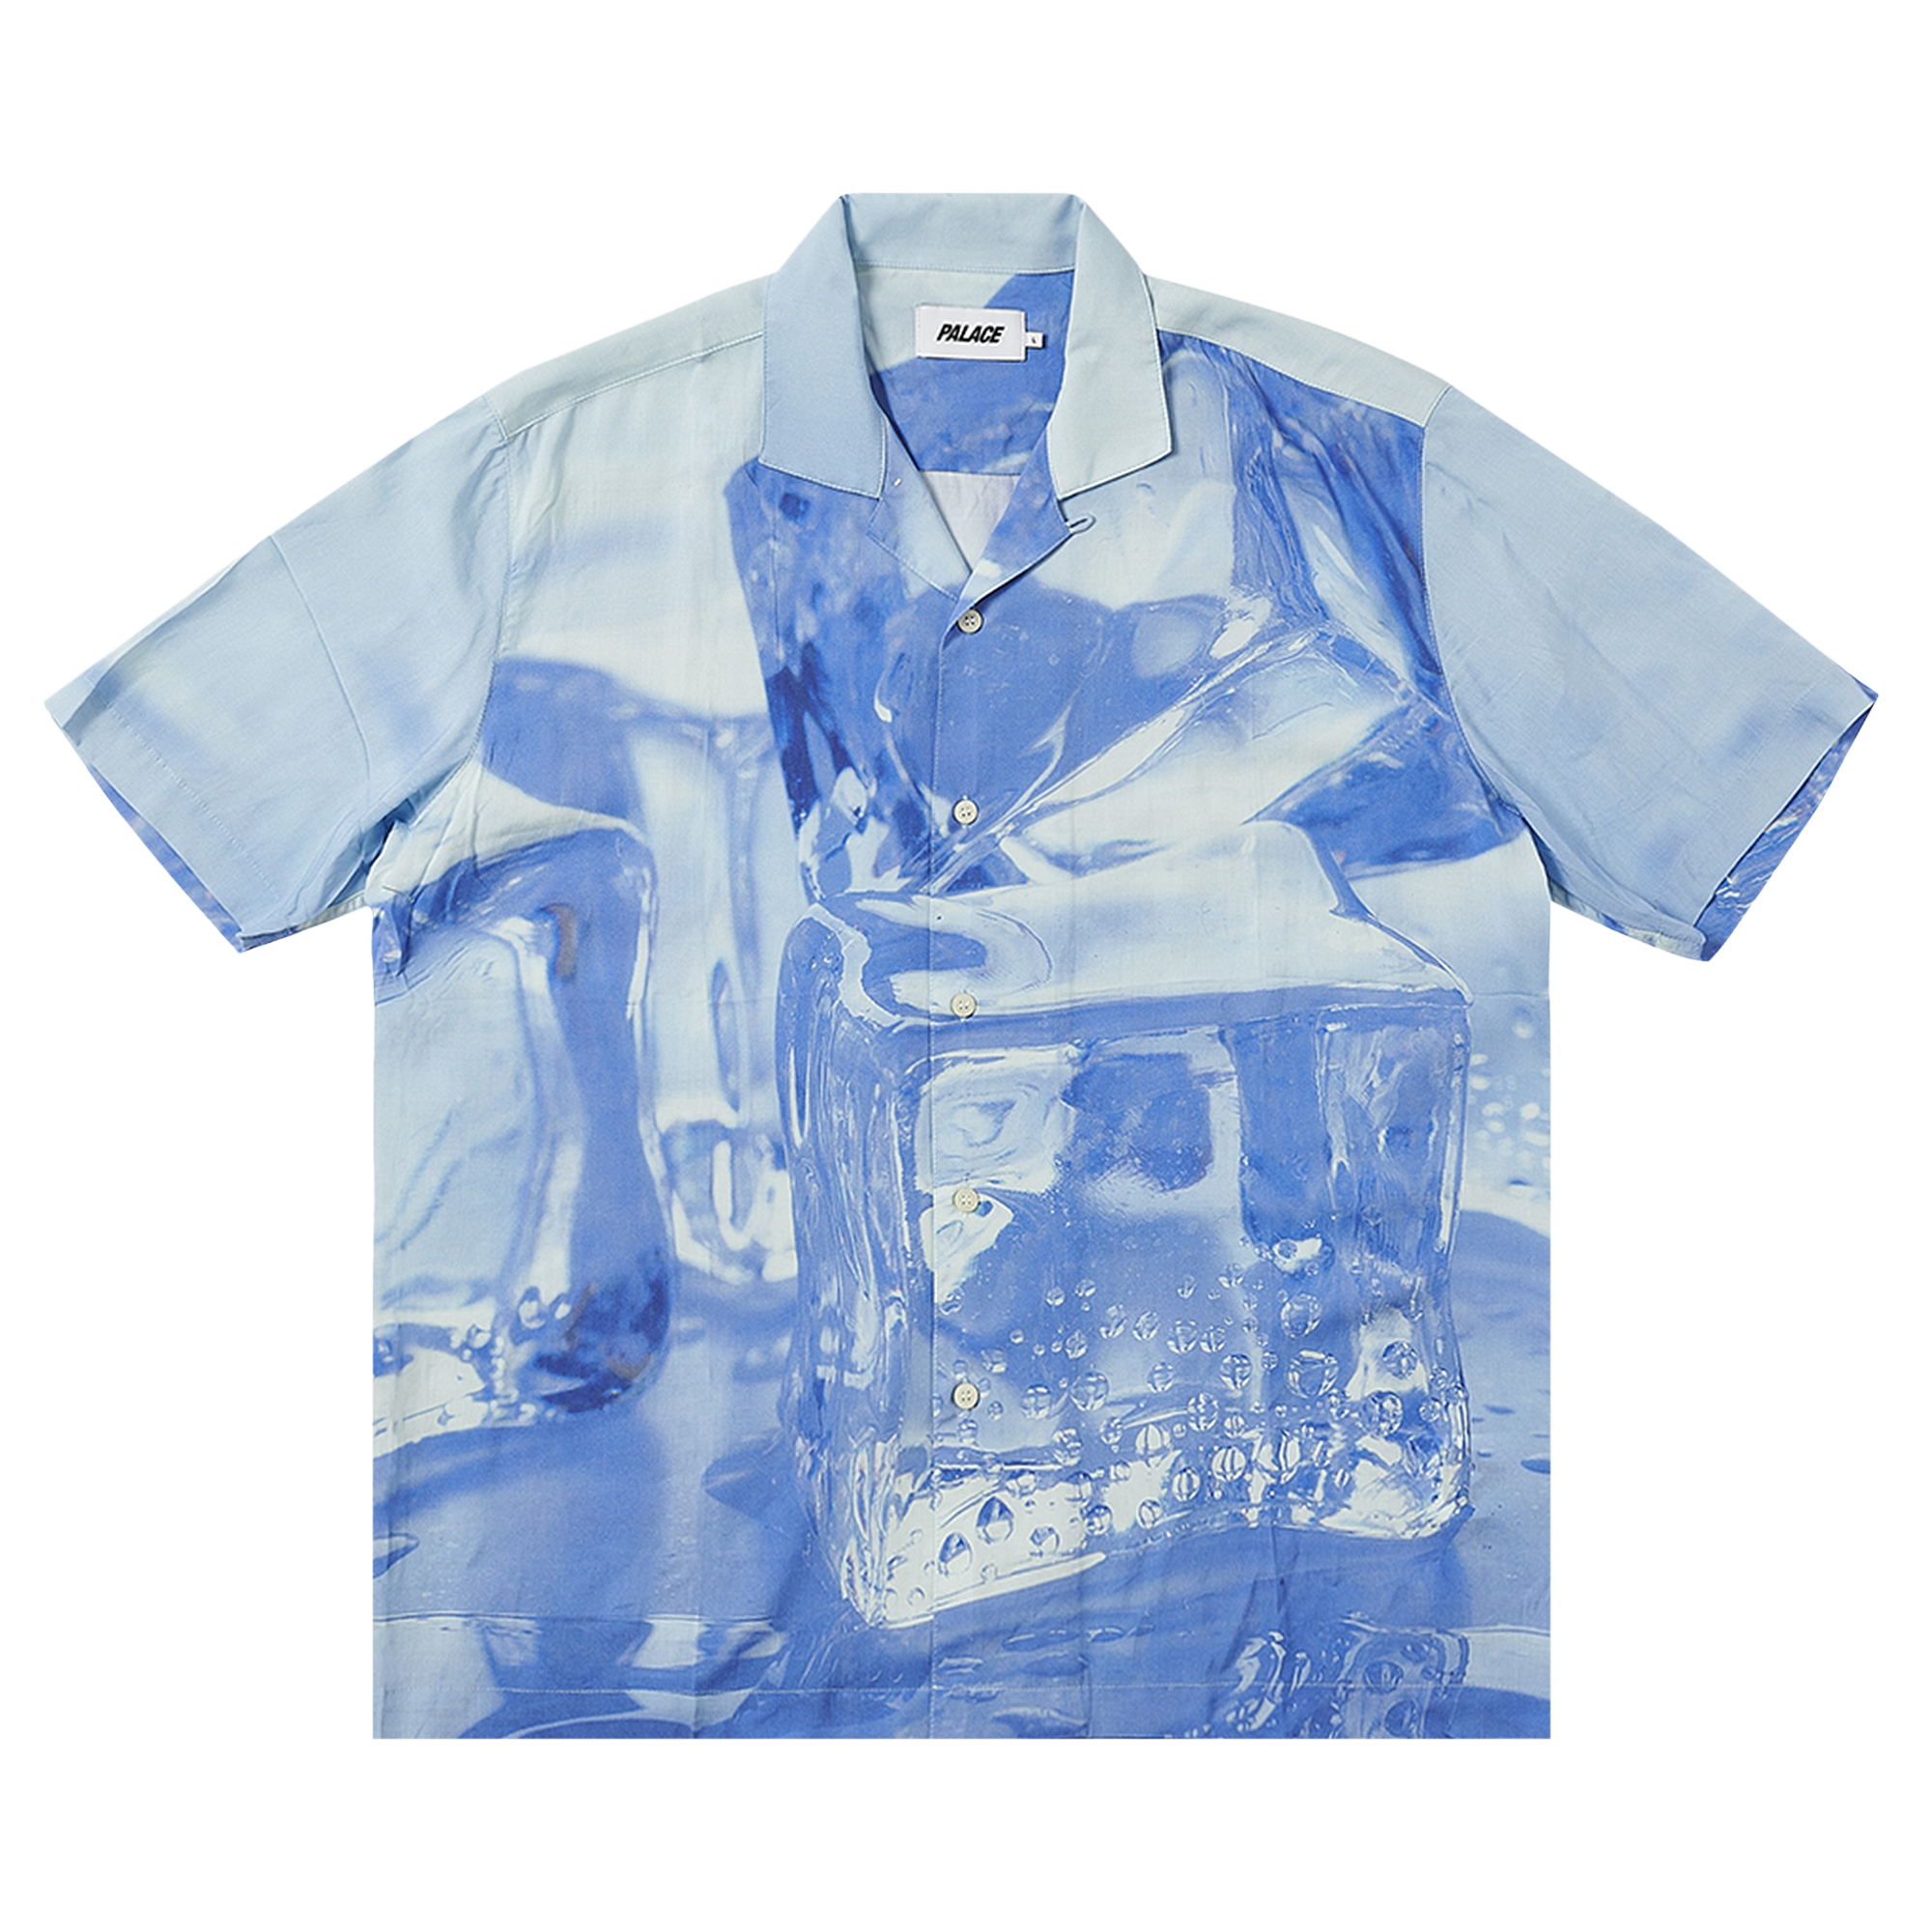 Pre-owned Palace Ultimate Chill Shirt 'crystalised Blue'